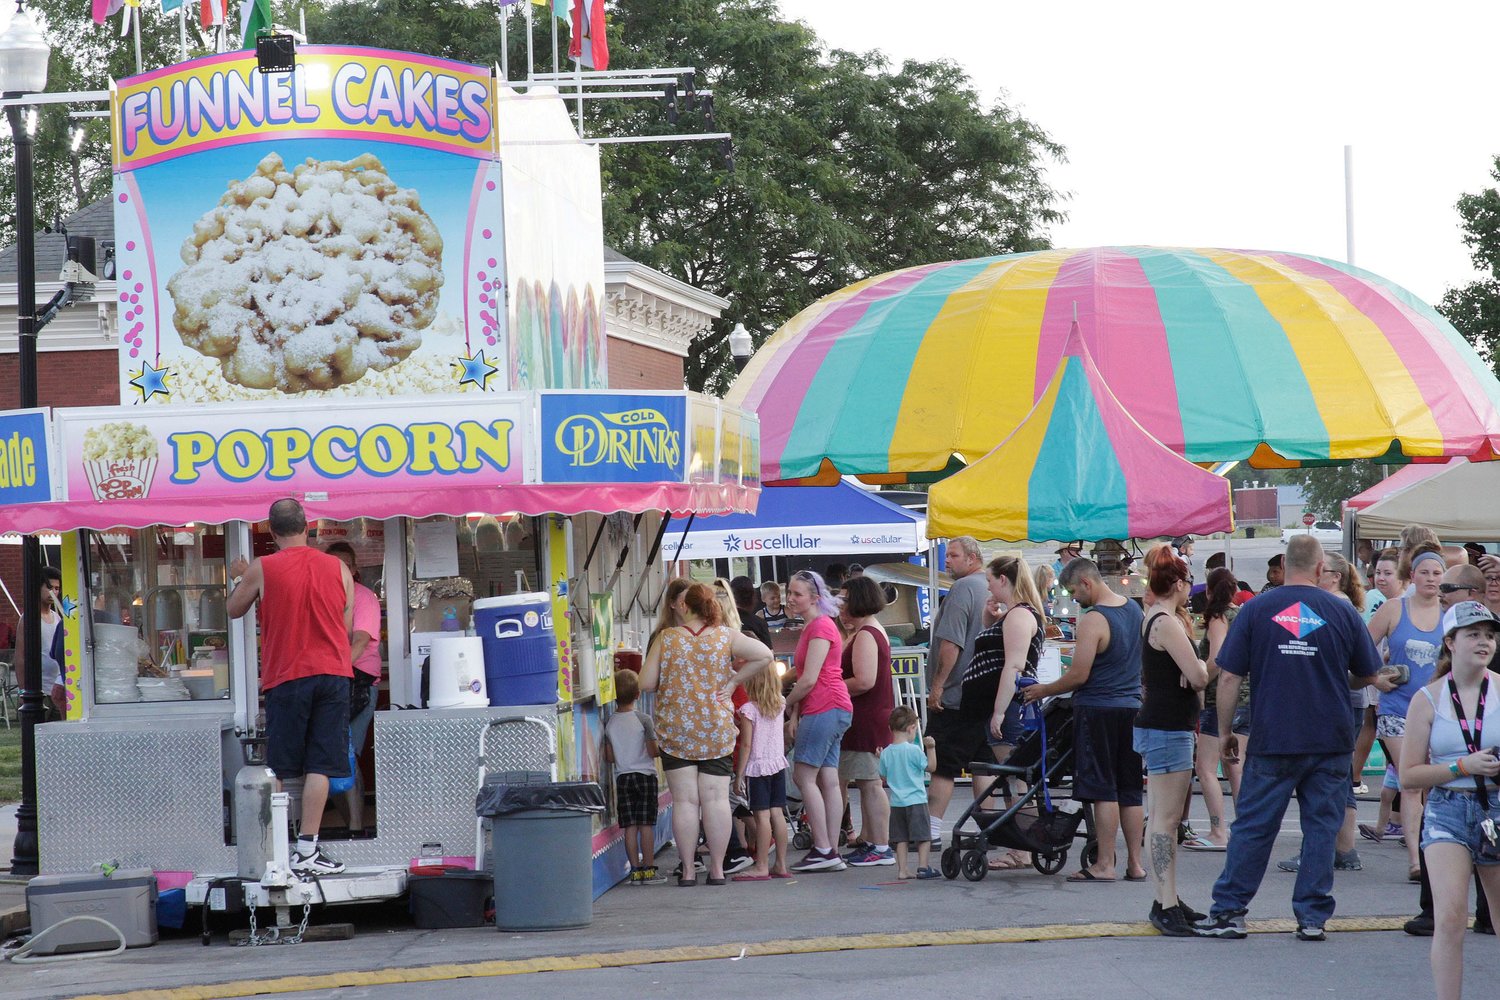 Railroad Days festival in downtown Moberly offers a variety of vendors with different food choice options. In addition to the carnival operation, there are about five local vendors or community service organizations offering food, including a designated beer garden area, from 5-10 p.m. Thursday through Saturday.